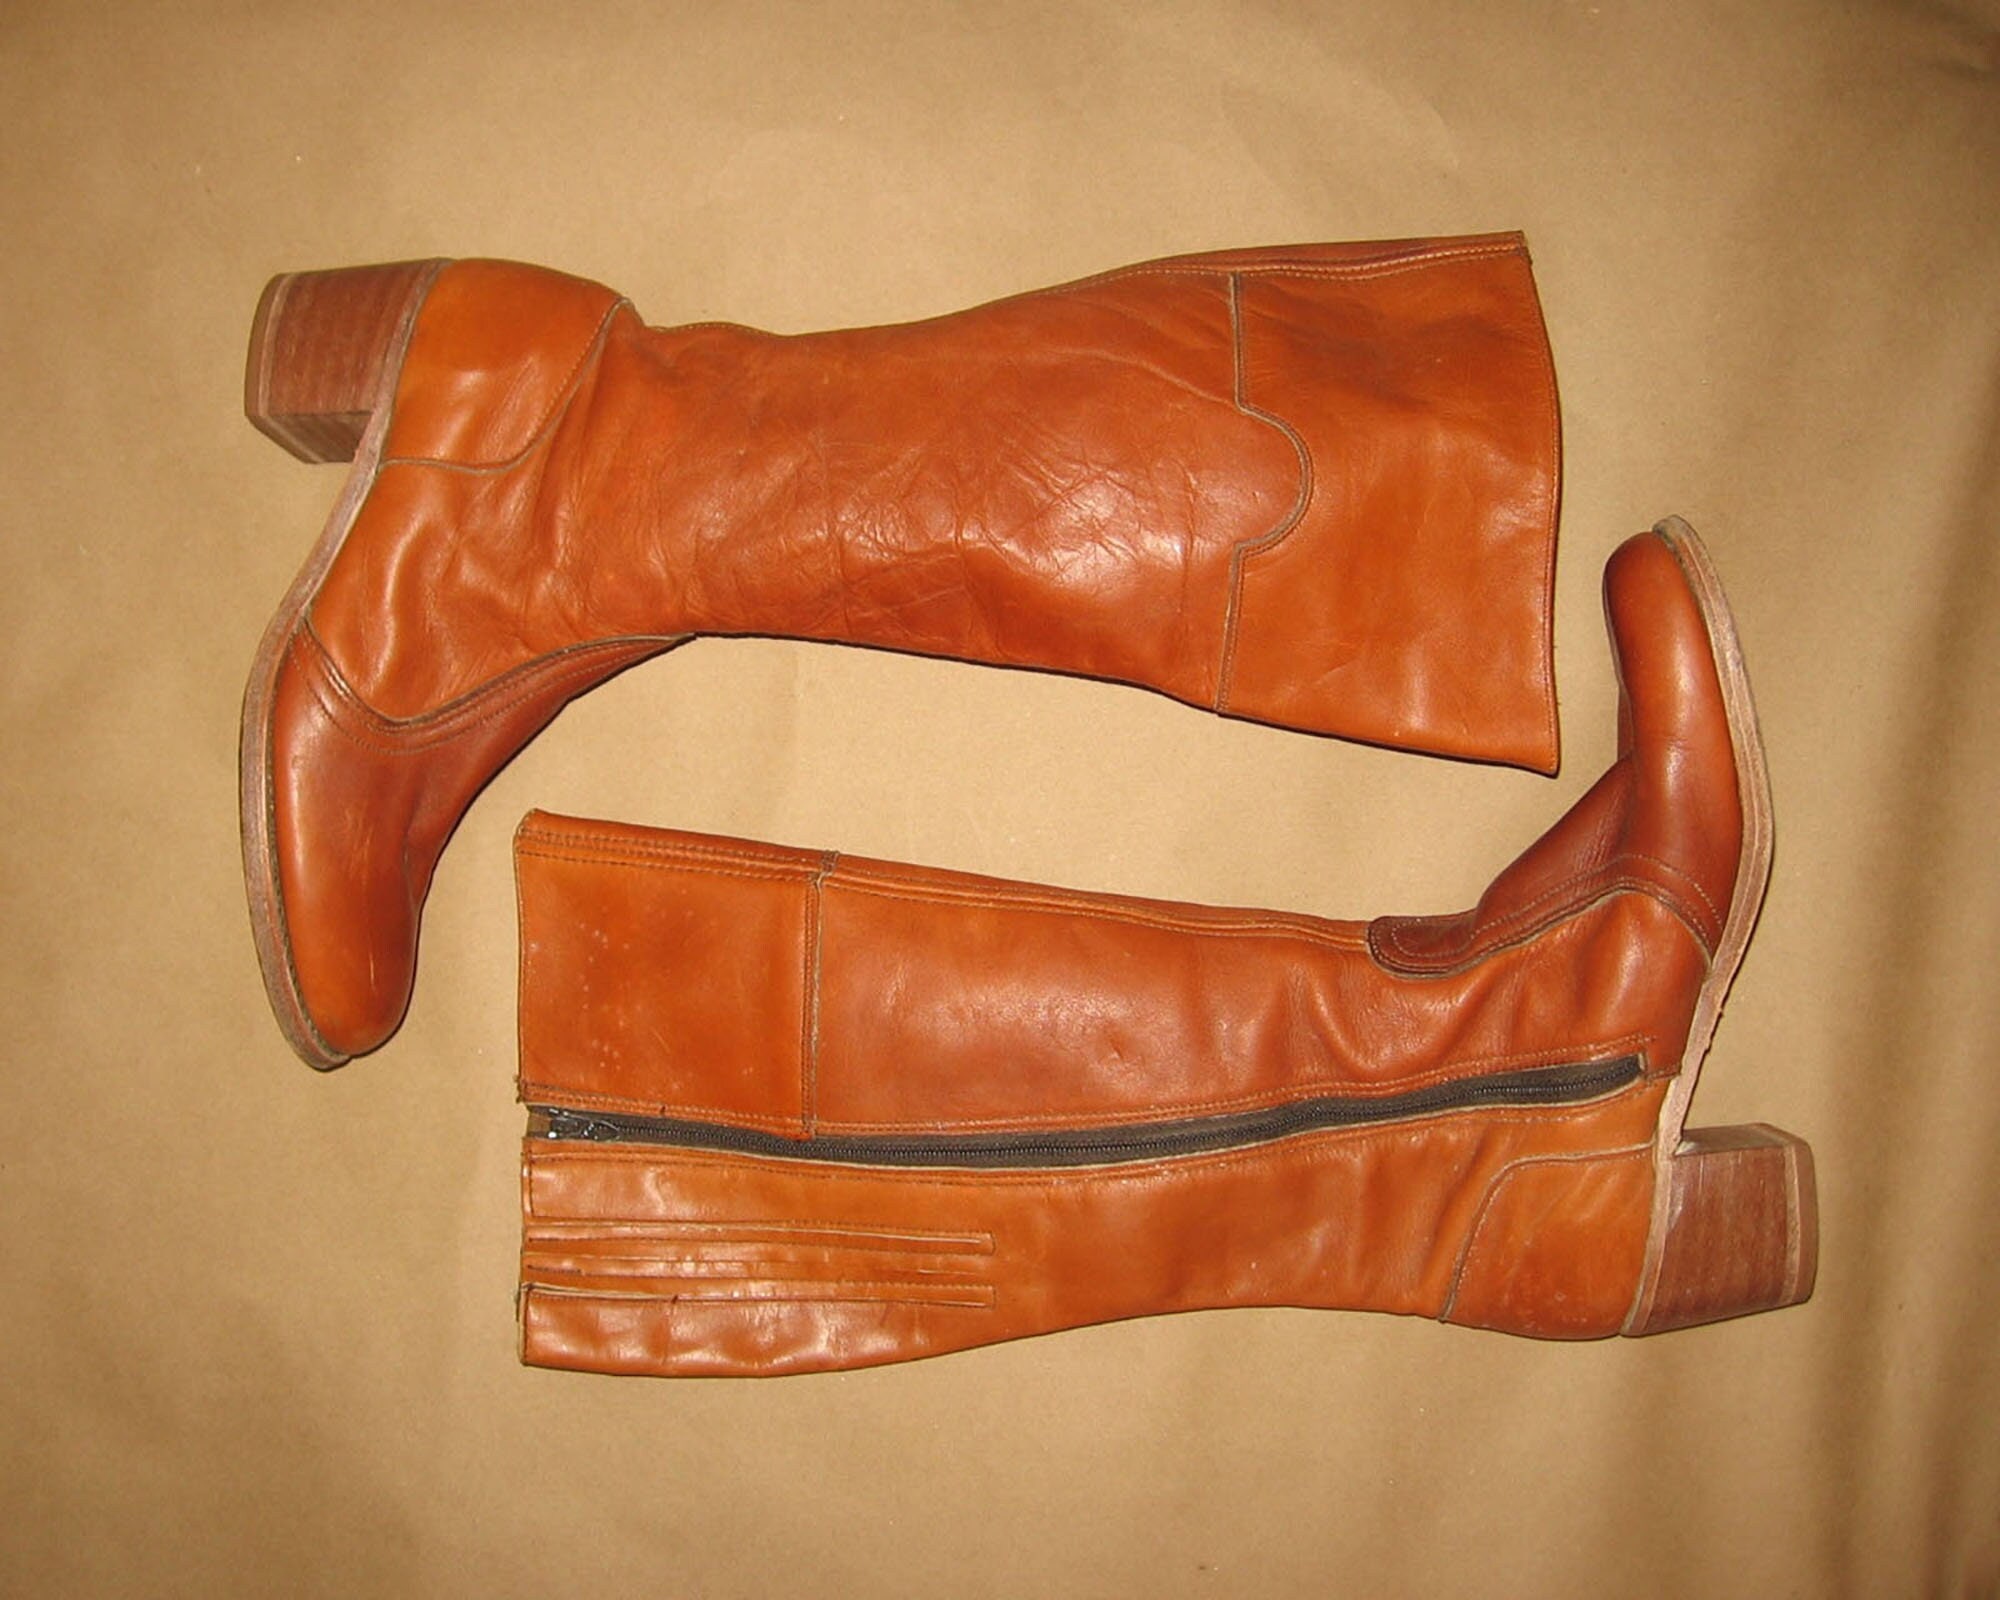 Vintage 70s Stacked Heel Dexter Boots Selected by MARMALADE